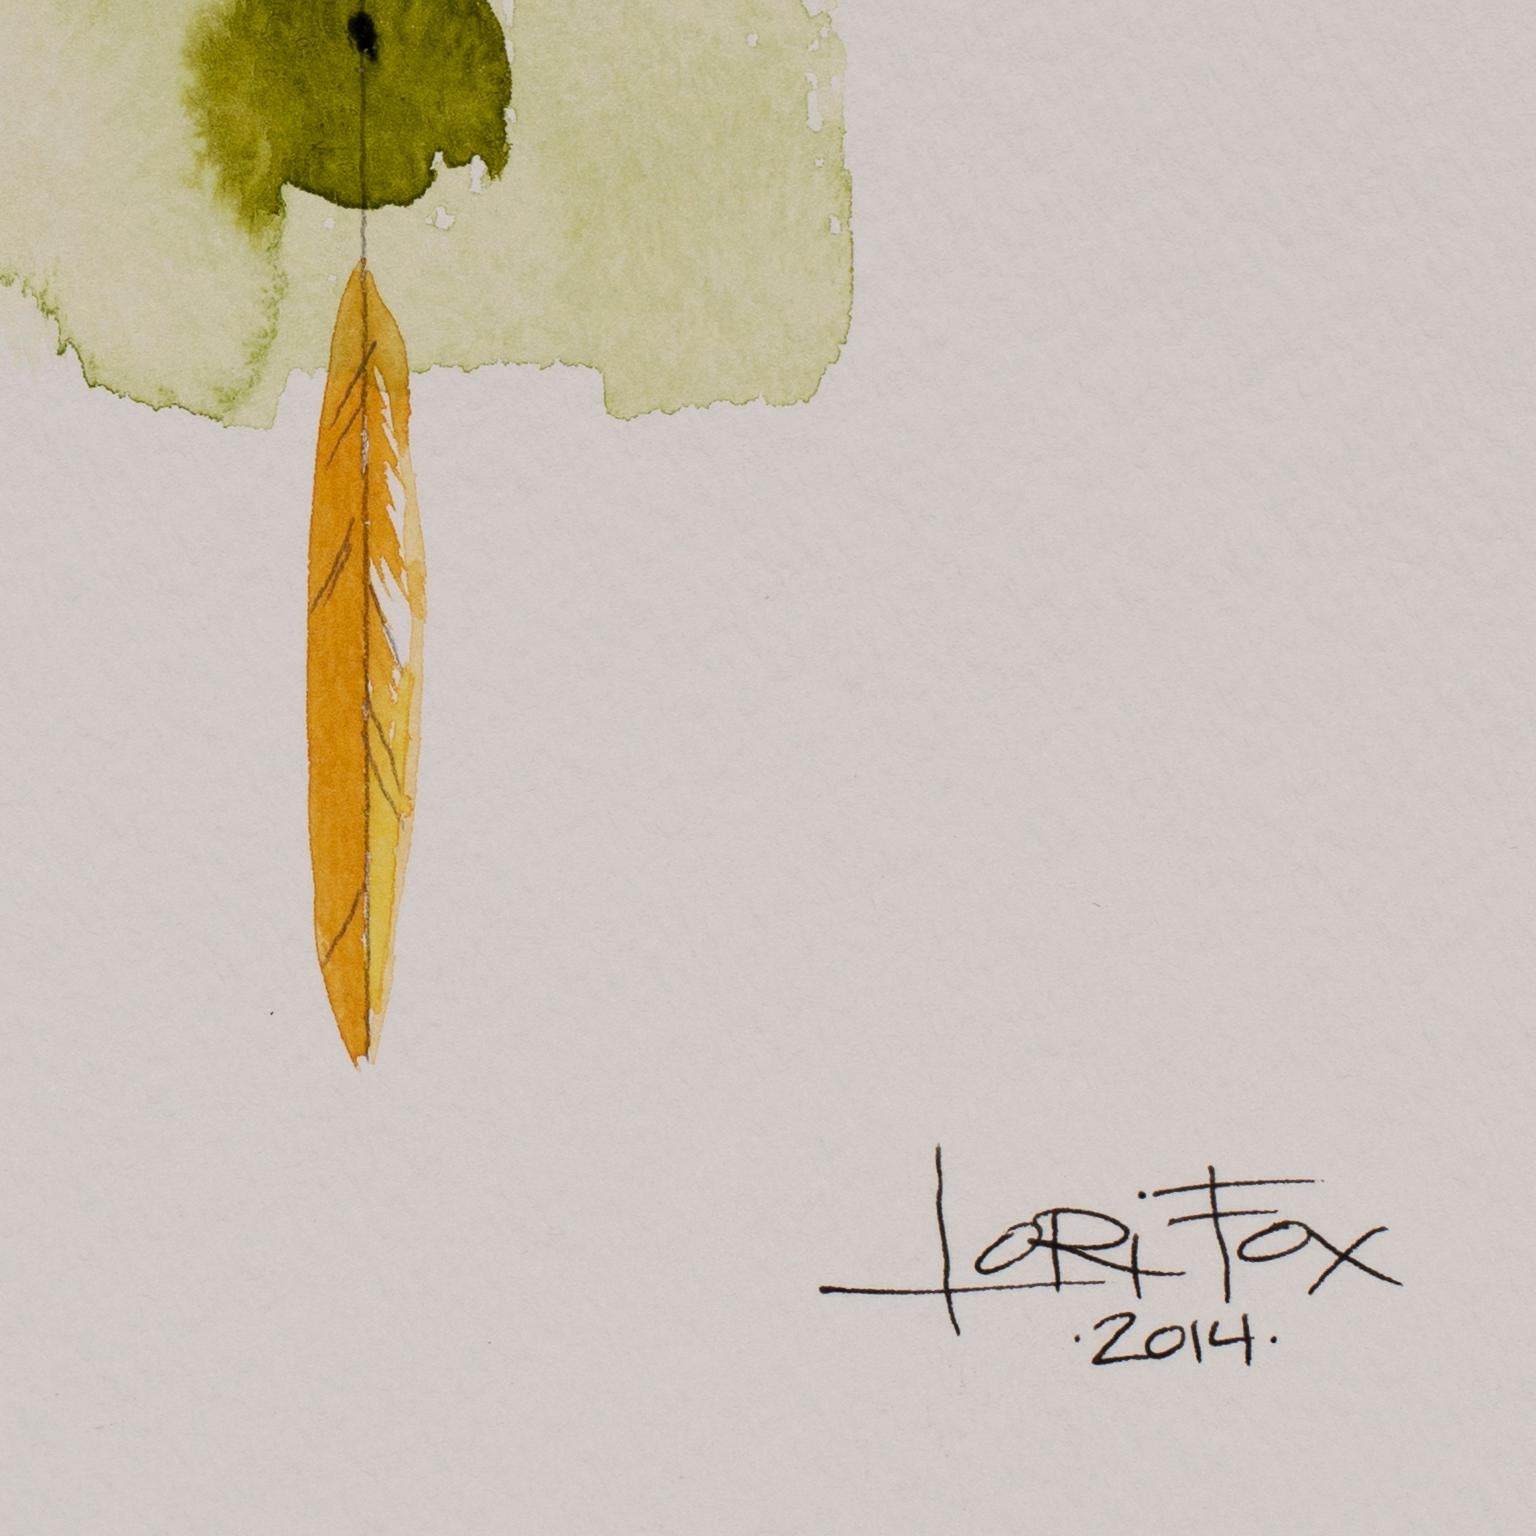 Totem 001 by Lori Fox. Green and yellow hues abstract watercolor and graphite im Angebot 3